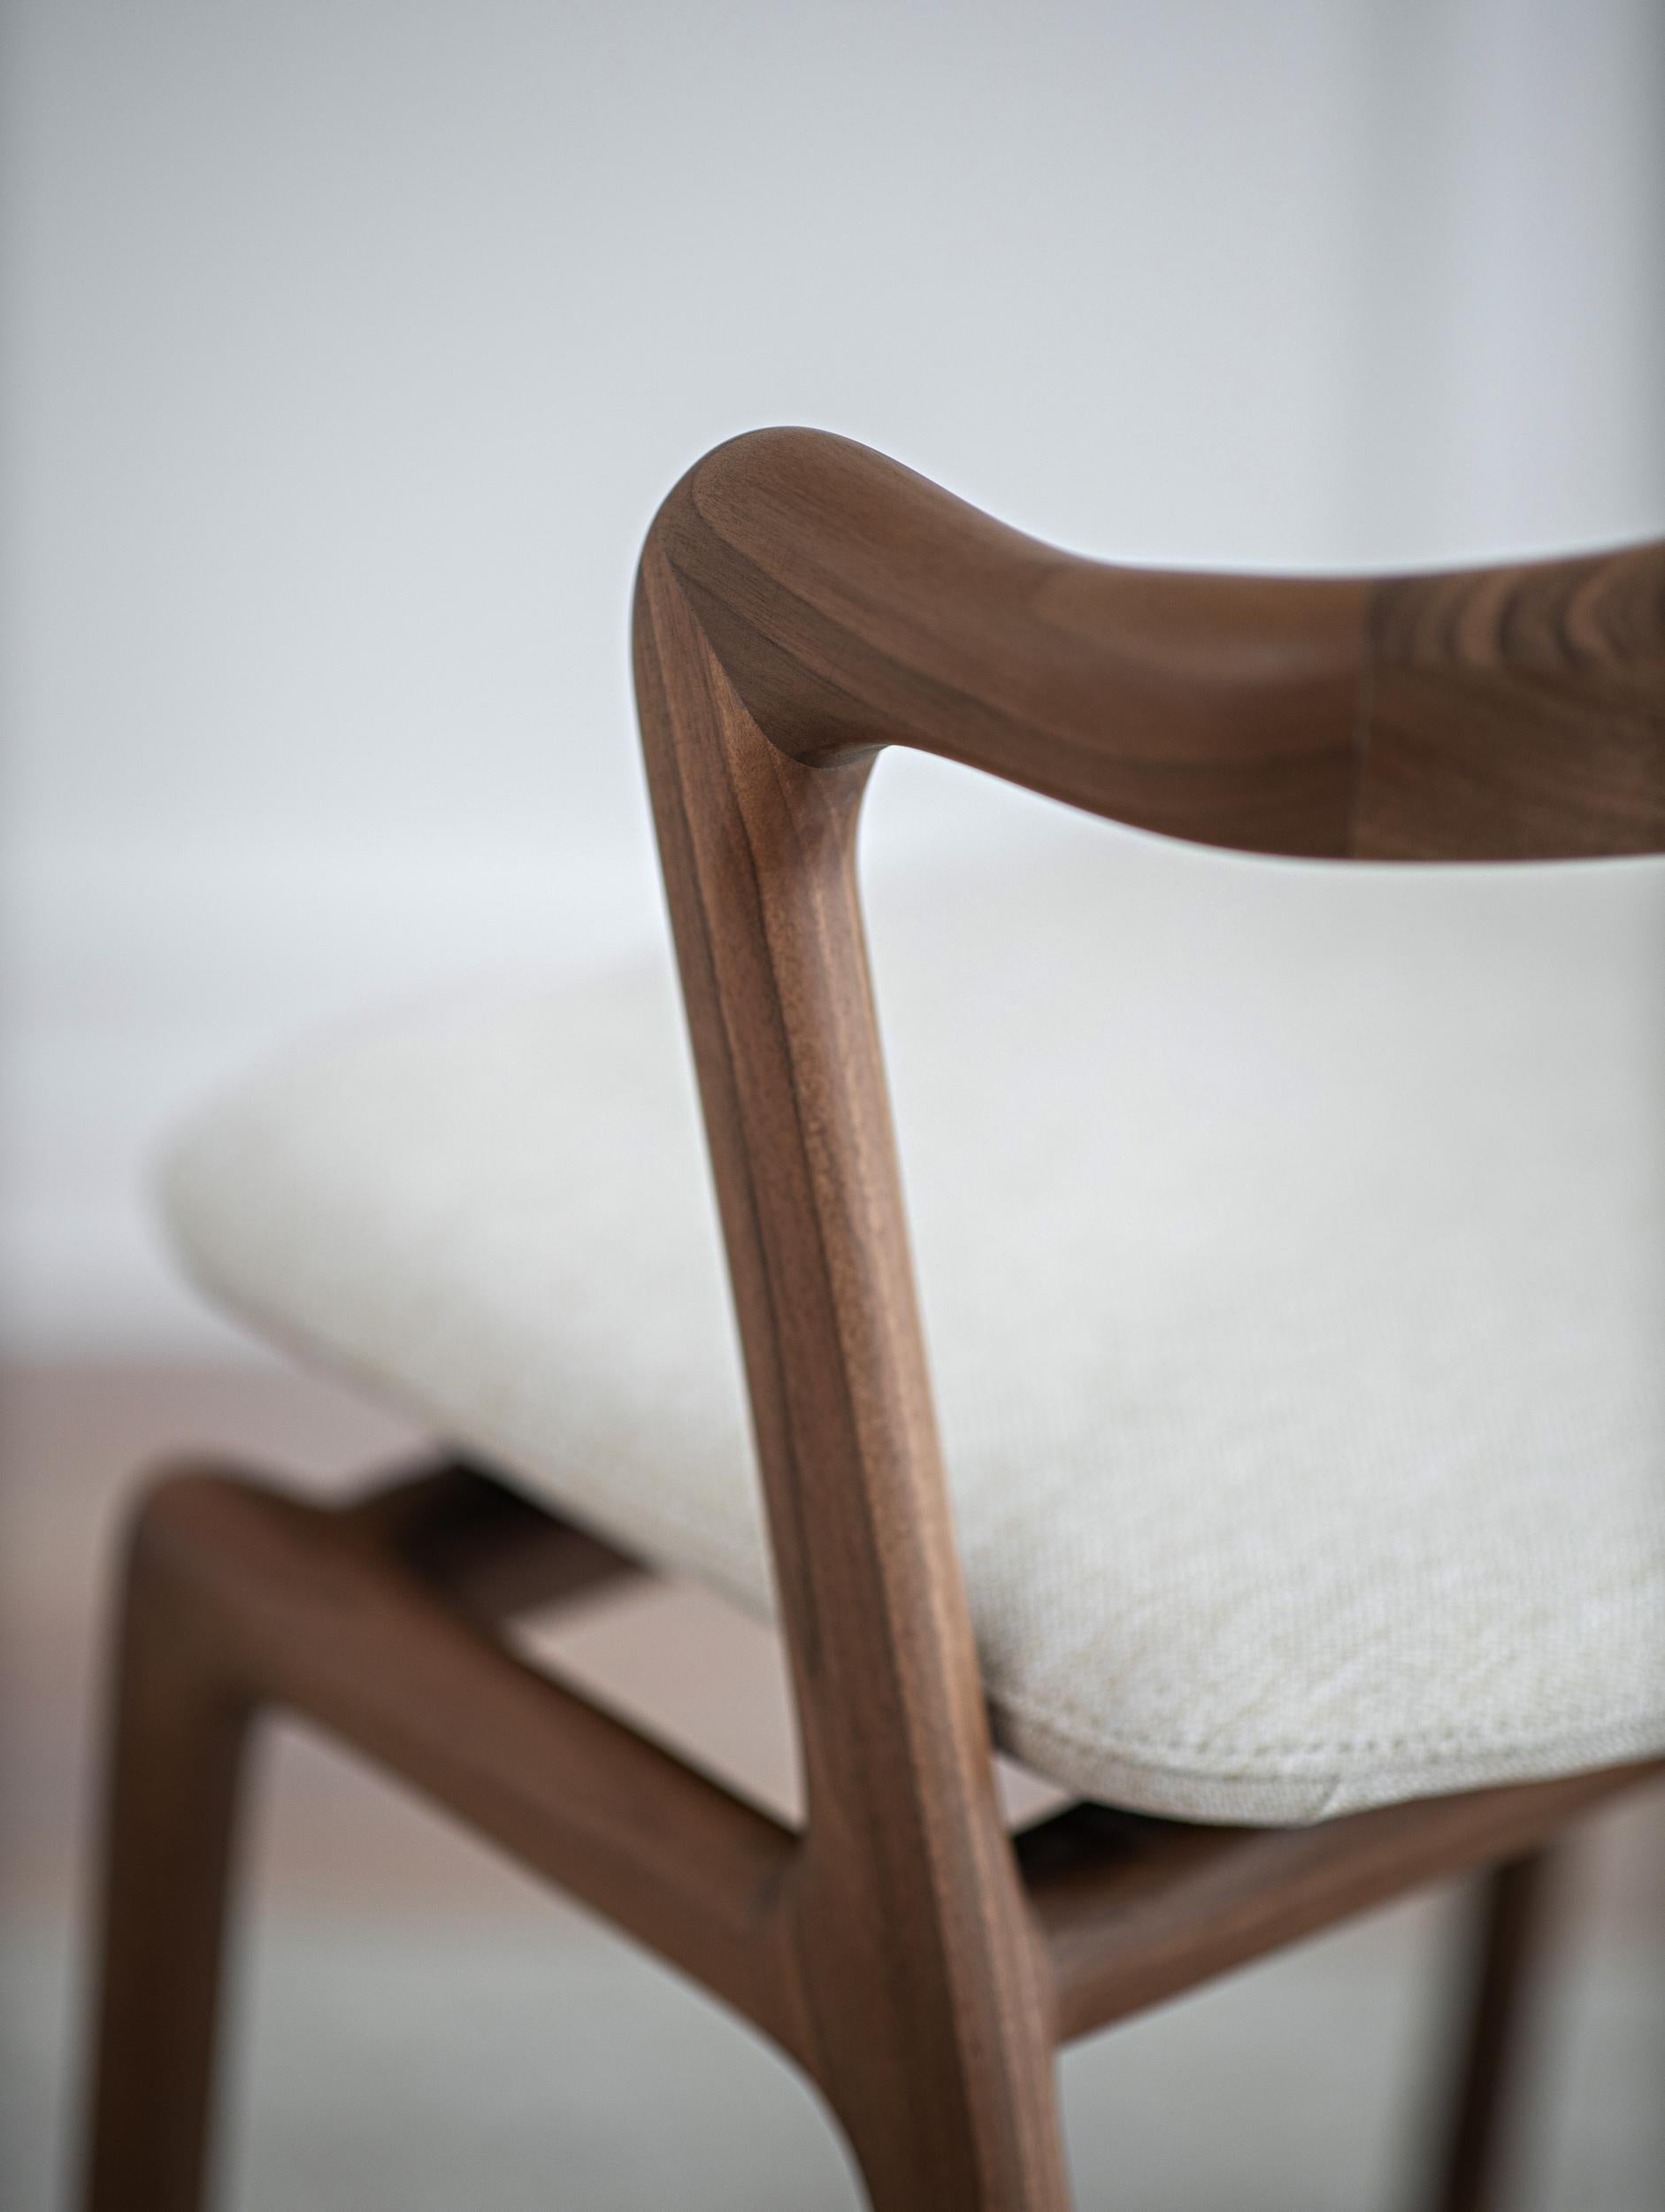 Otto chair is a handmade chair made of solid, high-quality walnut wood.
For its production, we use only carefully selected wood pieces.

The chair was designed by a French architect Charlie Pommier in Paris (France).

Important note: As our chair is